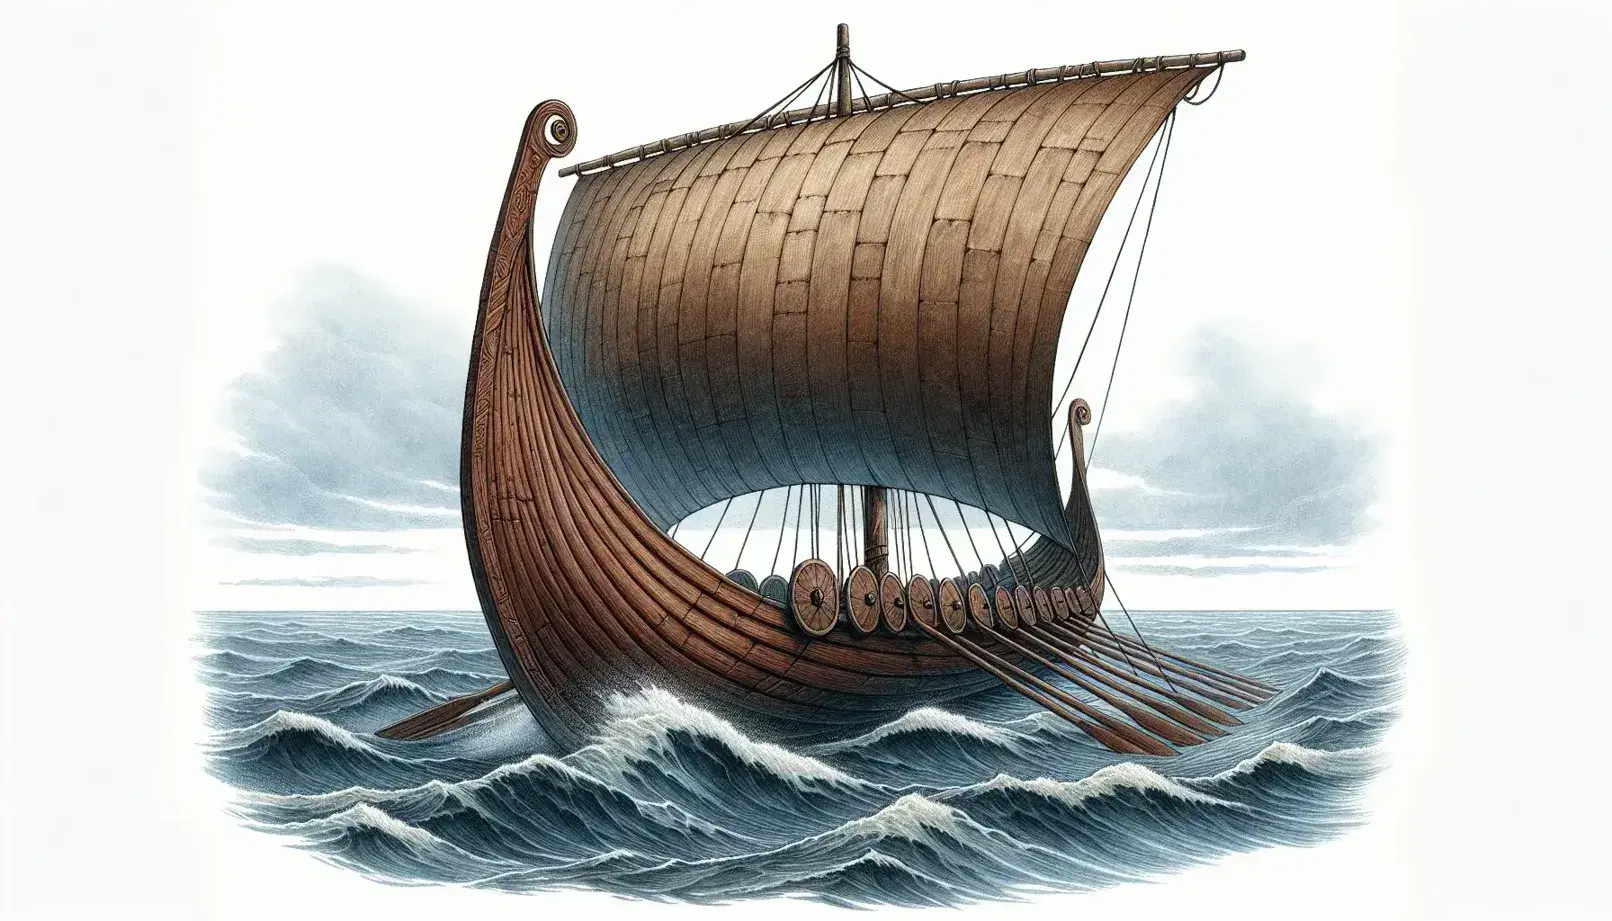 Viking longship at sea with a billowing square sail, ornate curled prows, and crew rowing amidst gentle waves, near a coastline.